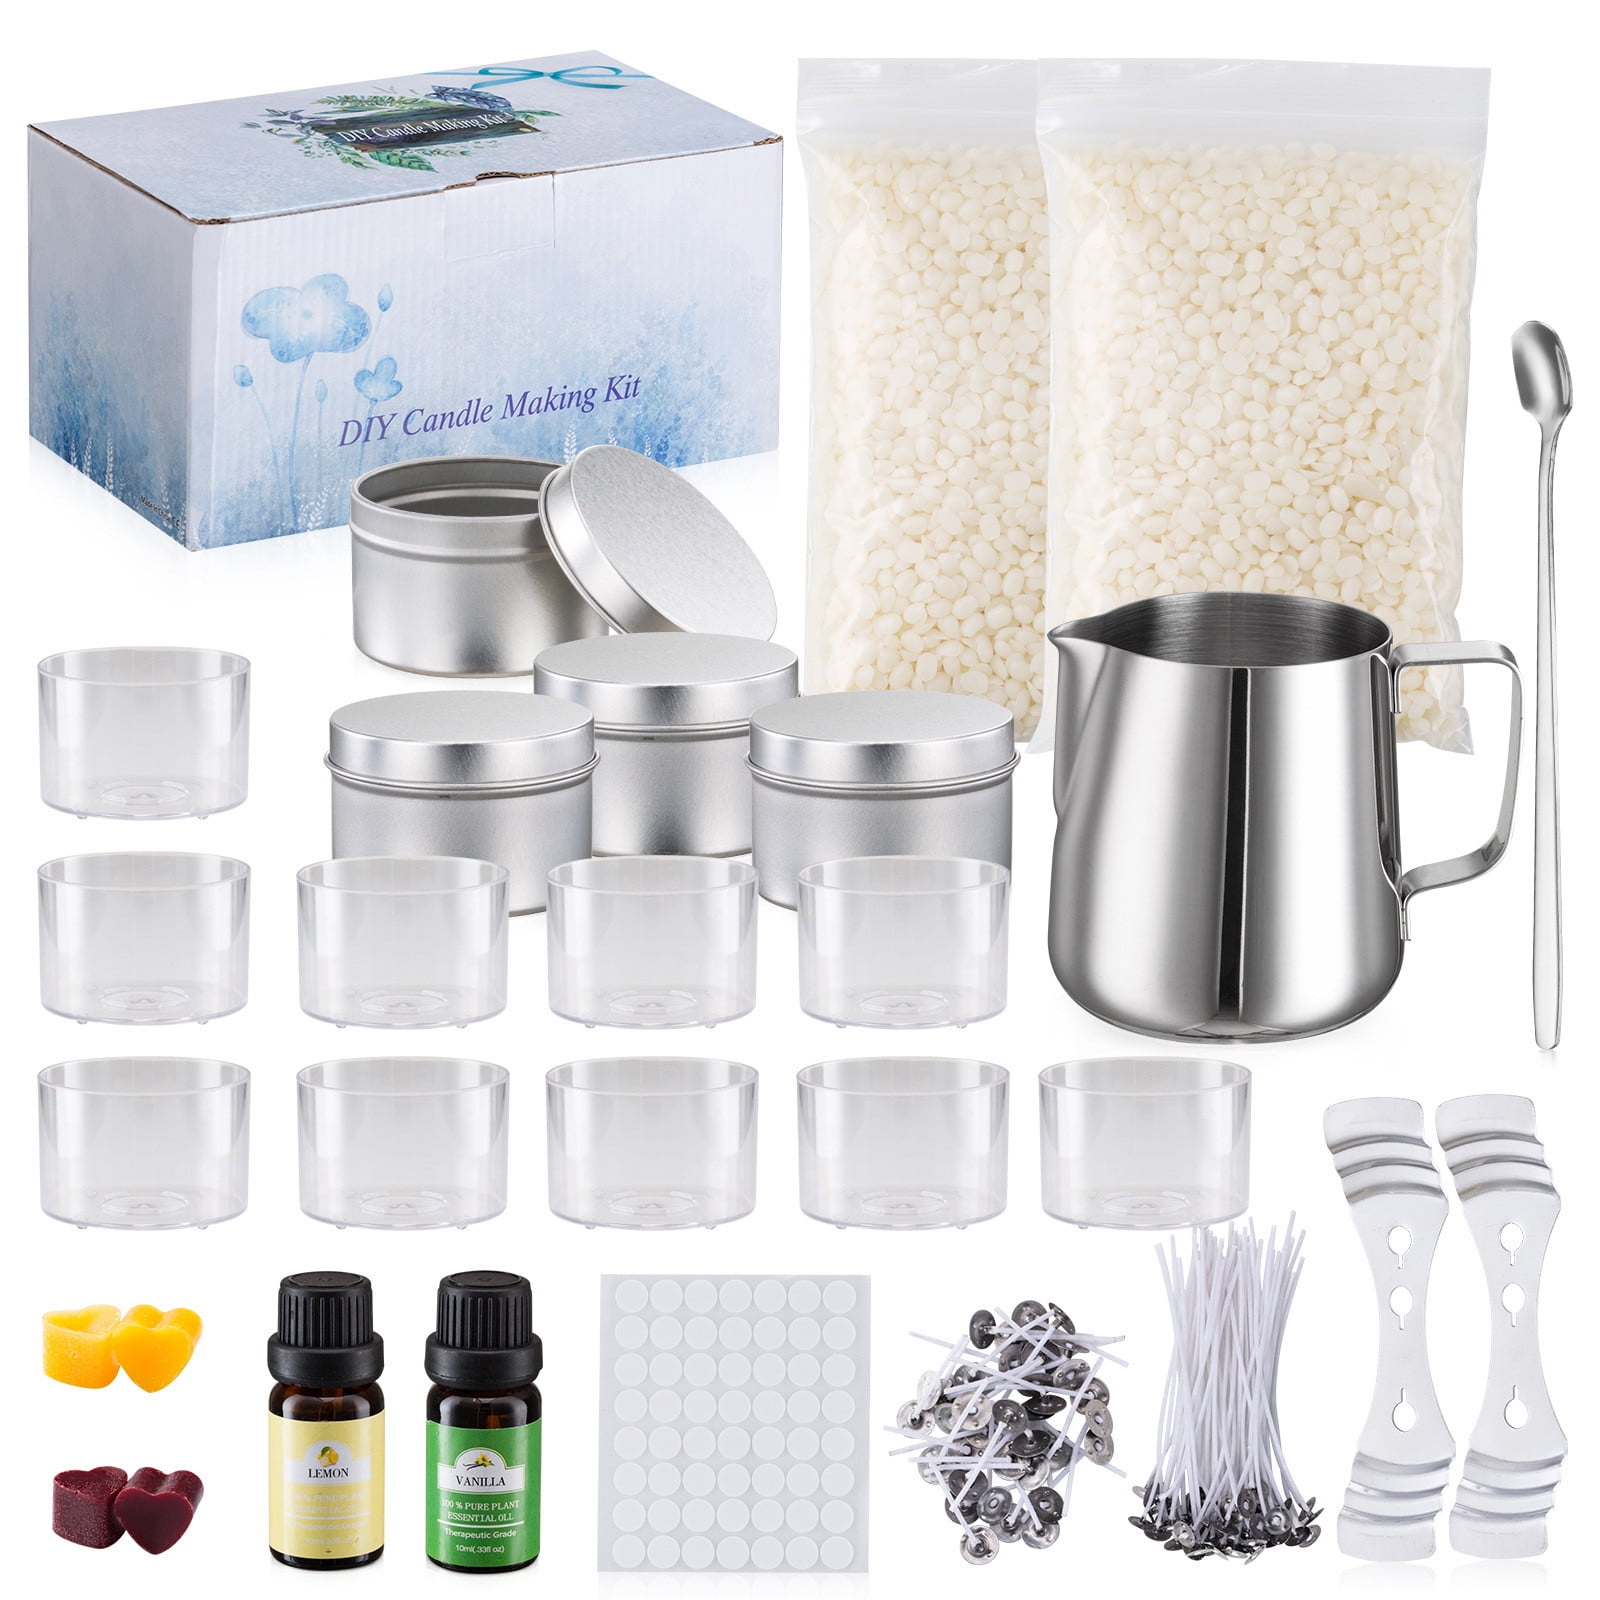  Candle Making Kit - Soy Candle Making Kits for Adults Beginners  - Candle Making Supplies - Candle Pouring Pot, Soy Wax, Candle Wicks, 6  Fragrance Oil for Candle Making - Arts